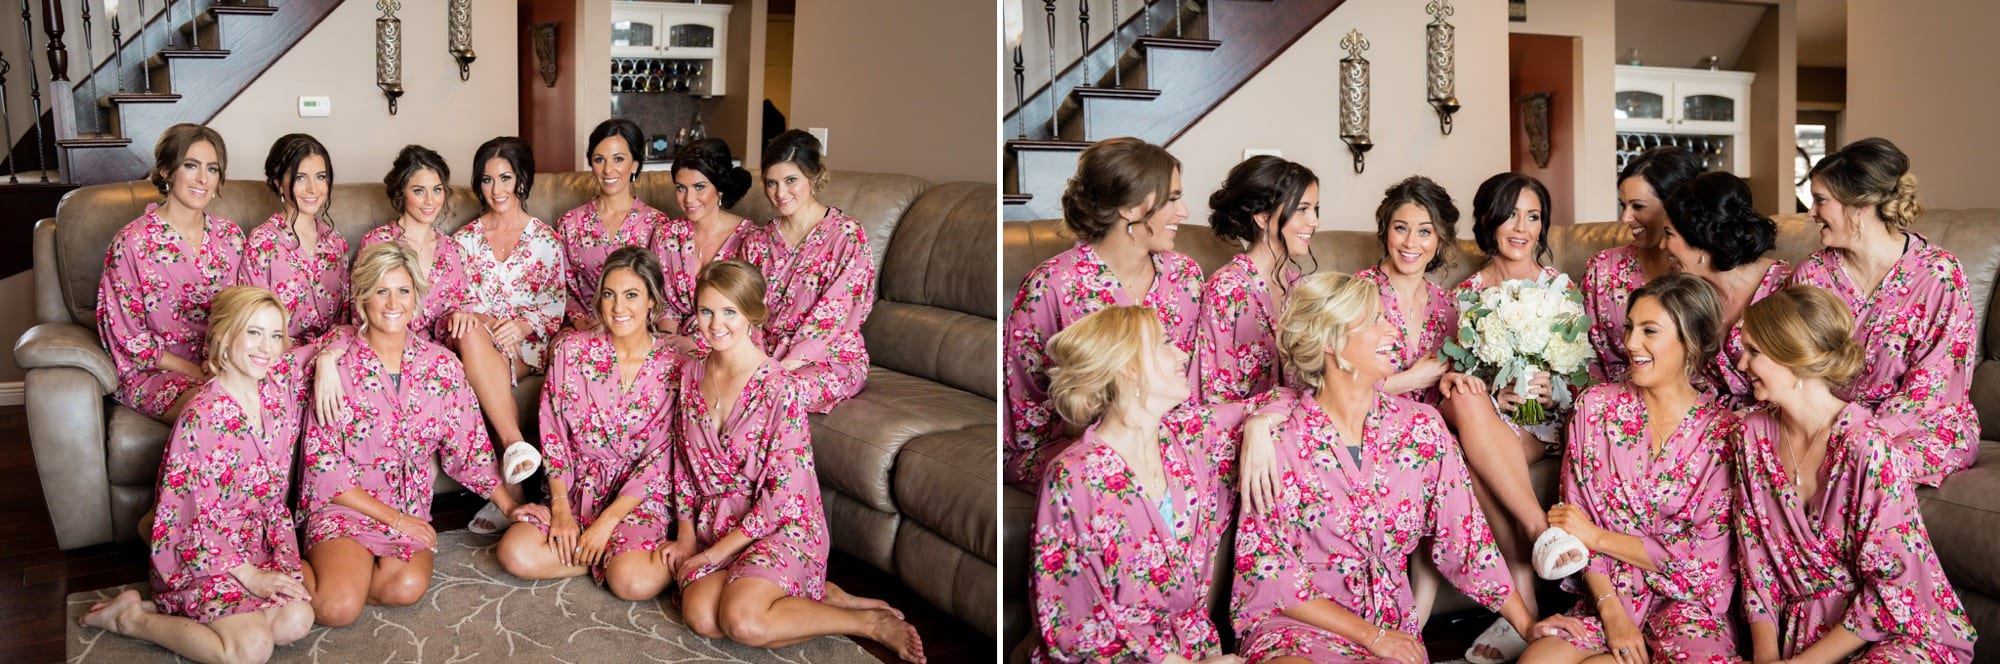 bride and bridesmaids in matching outfits